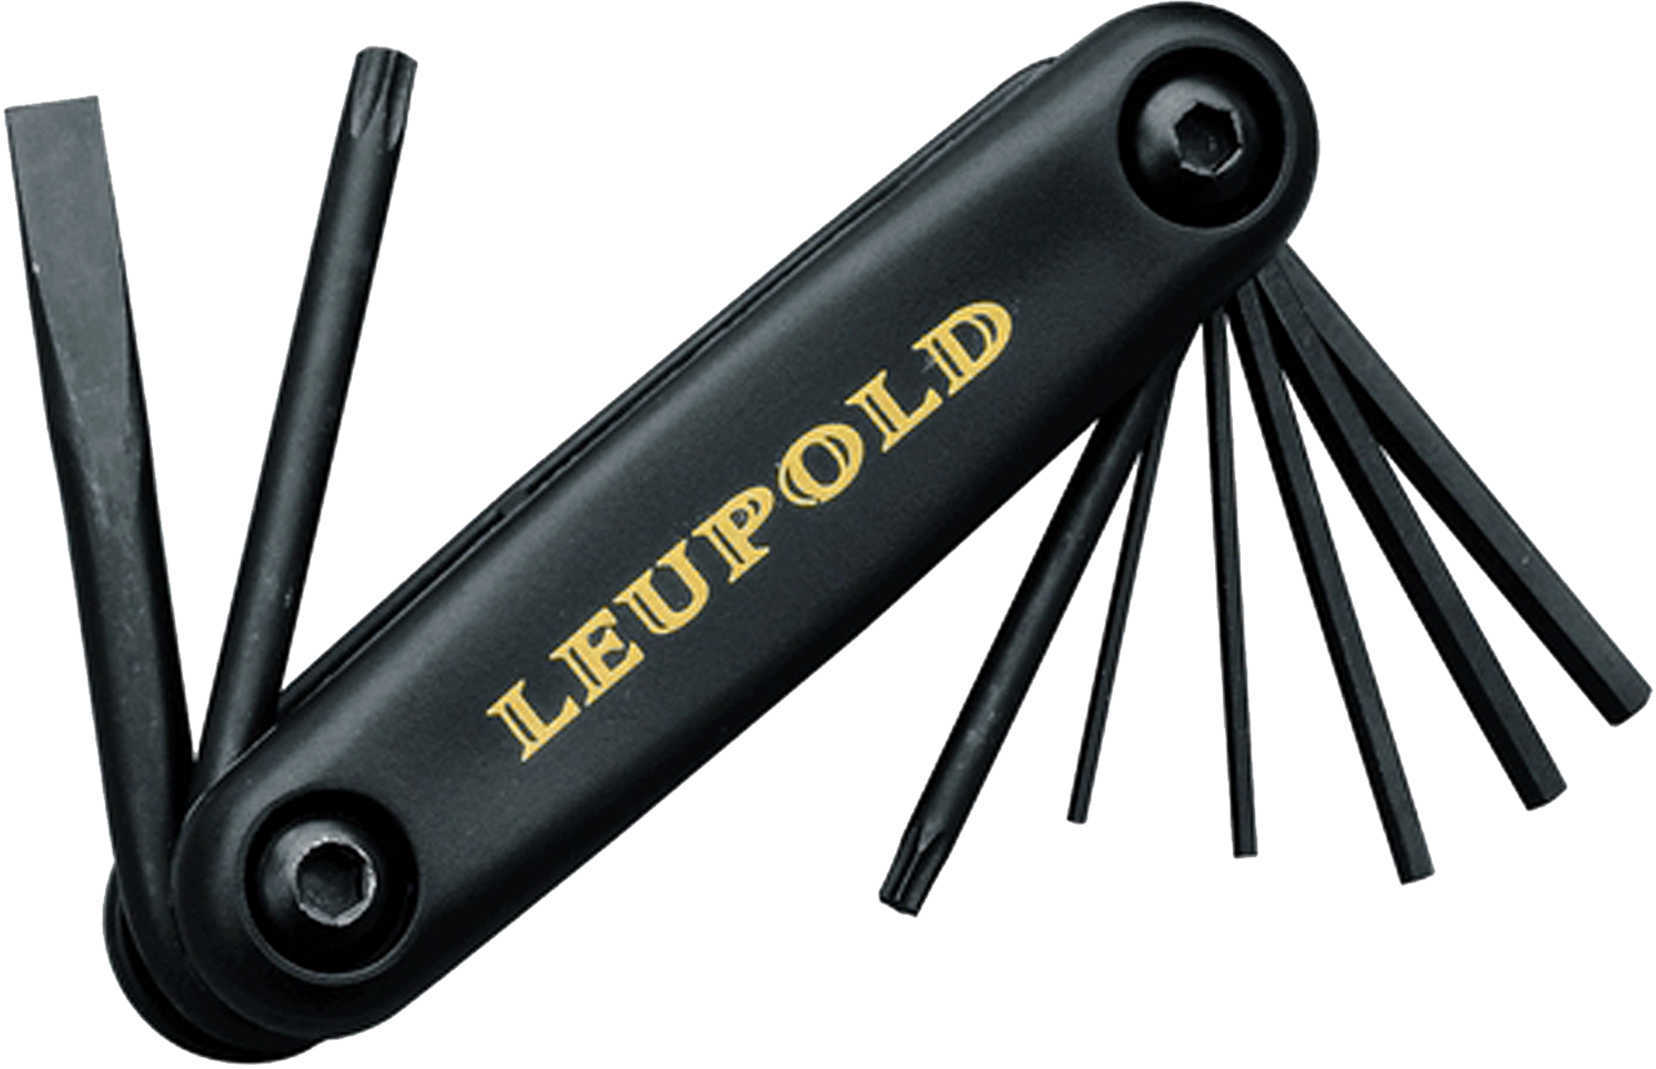 Leupold Mounting Tool With Slotted Screwdriver/Torx & Hex Head Drivers Md: 52296